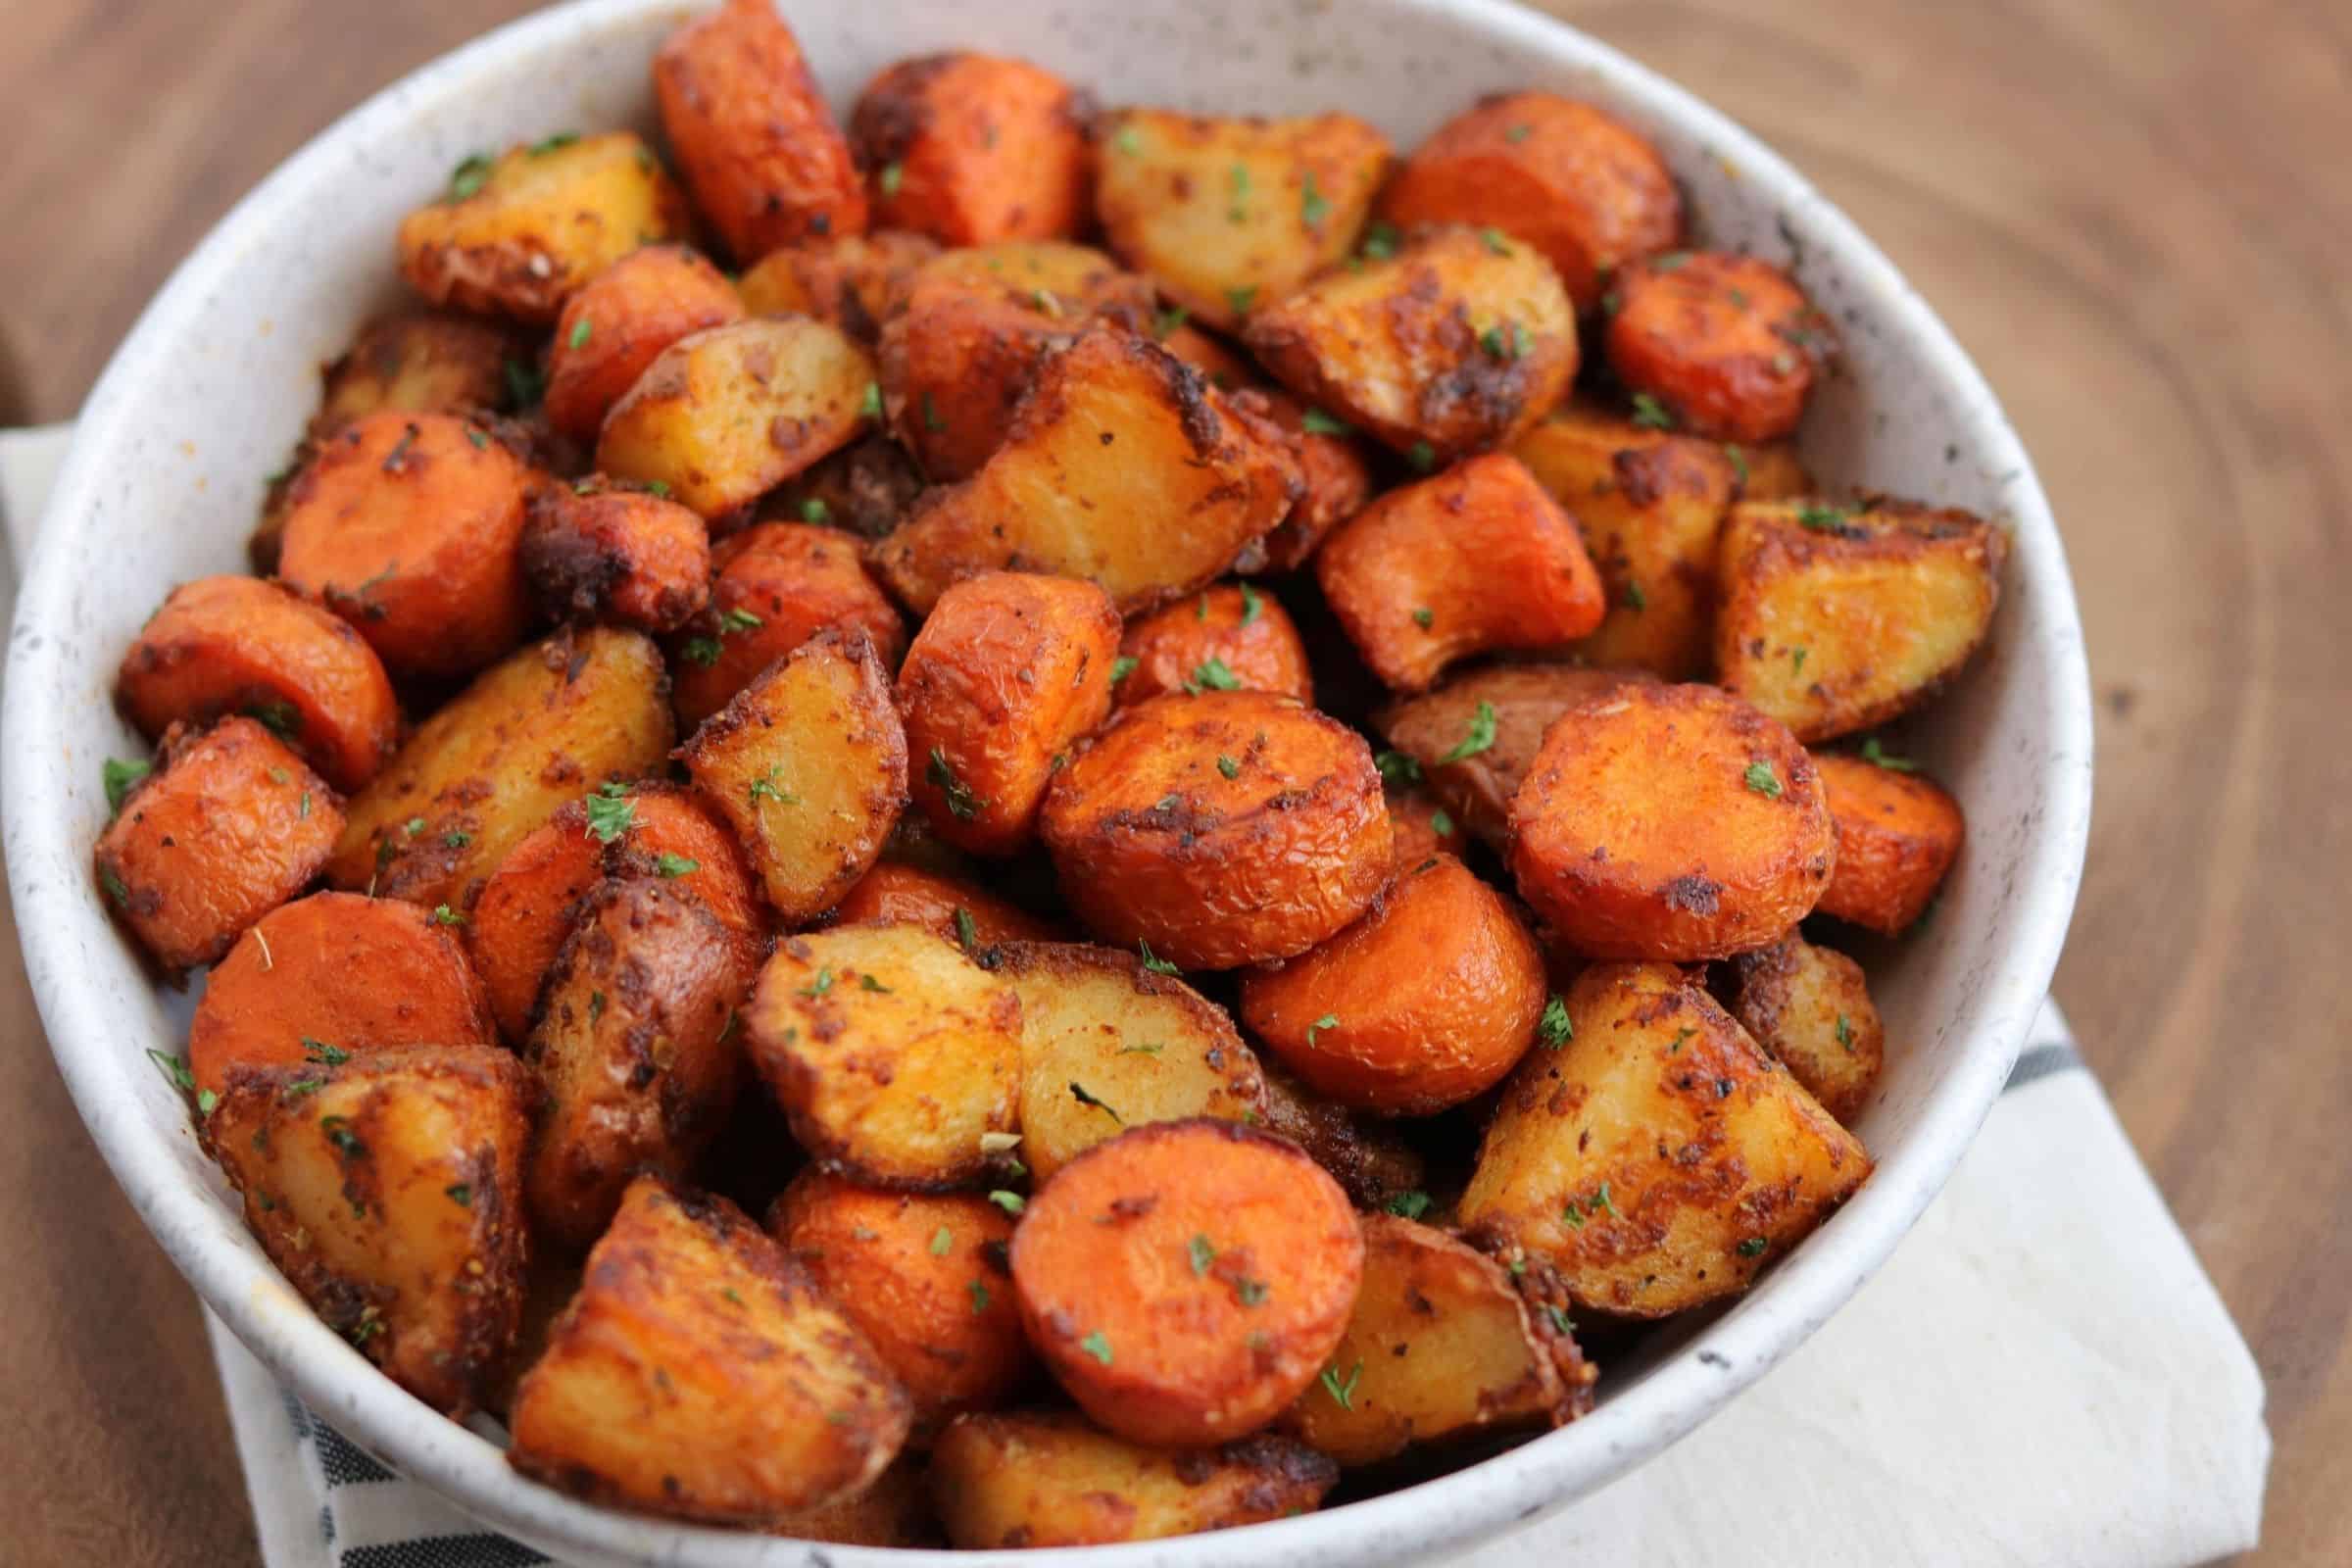 https://masonfit.com/wp-content/uploads/2020/08/air-fryer-roasted-potatoes-and-carrots-featured-image.jpg